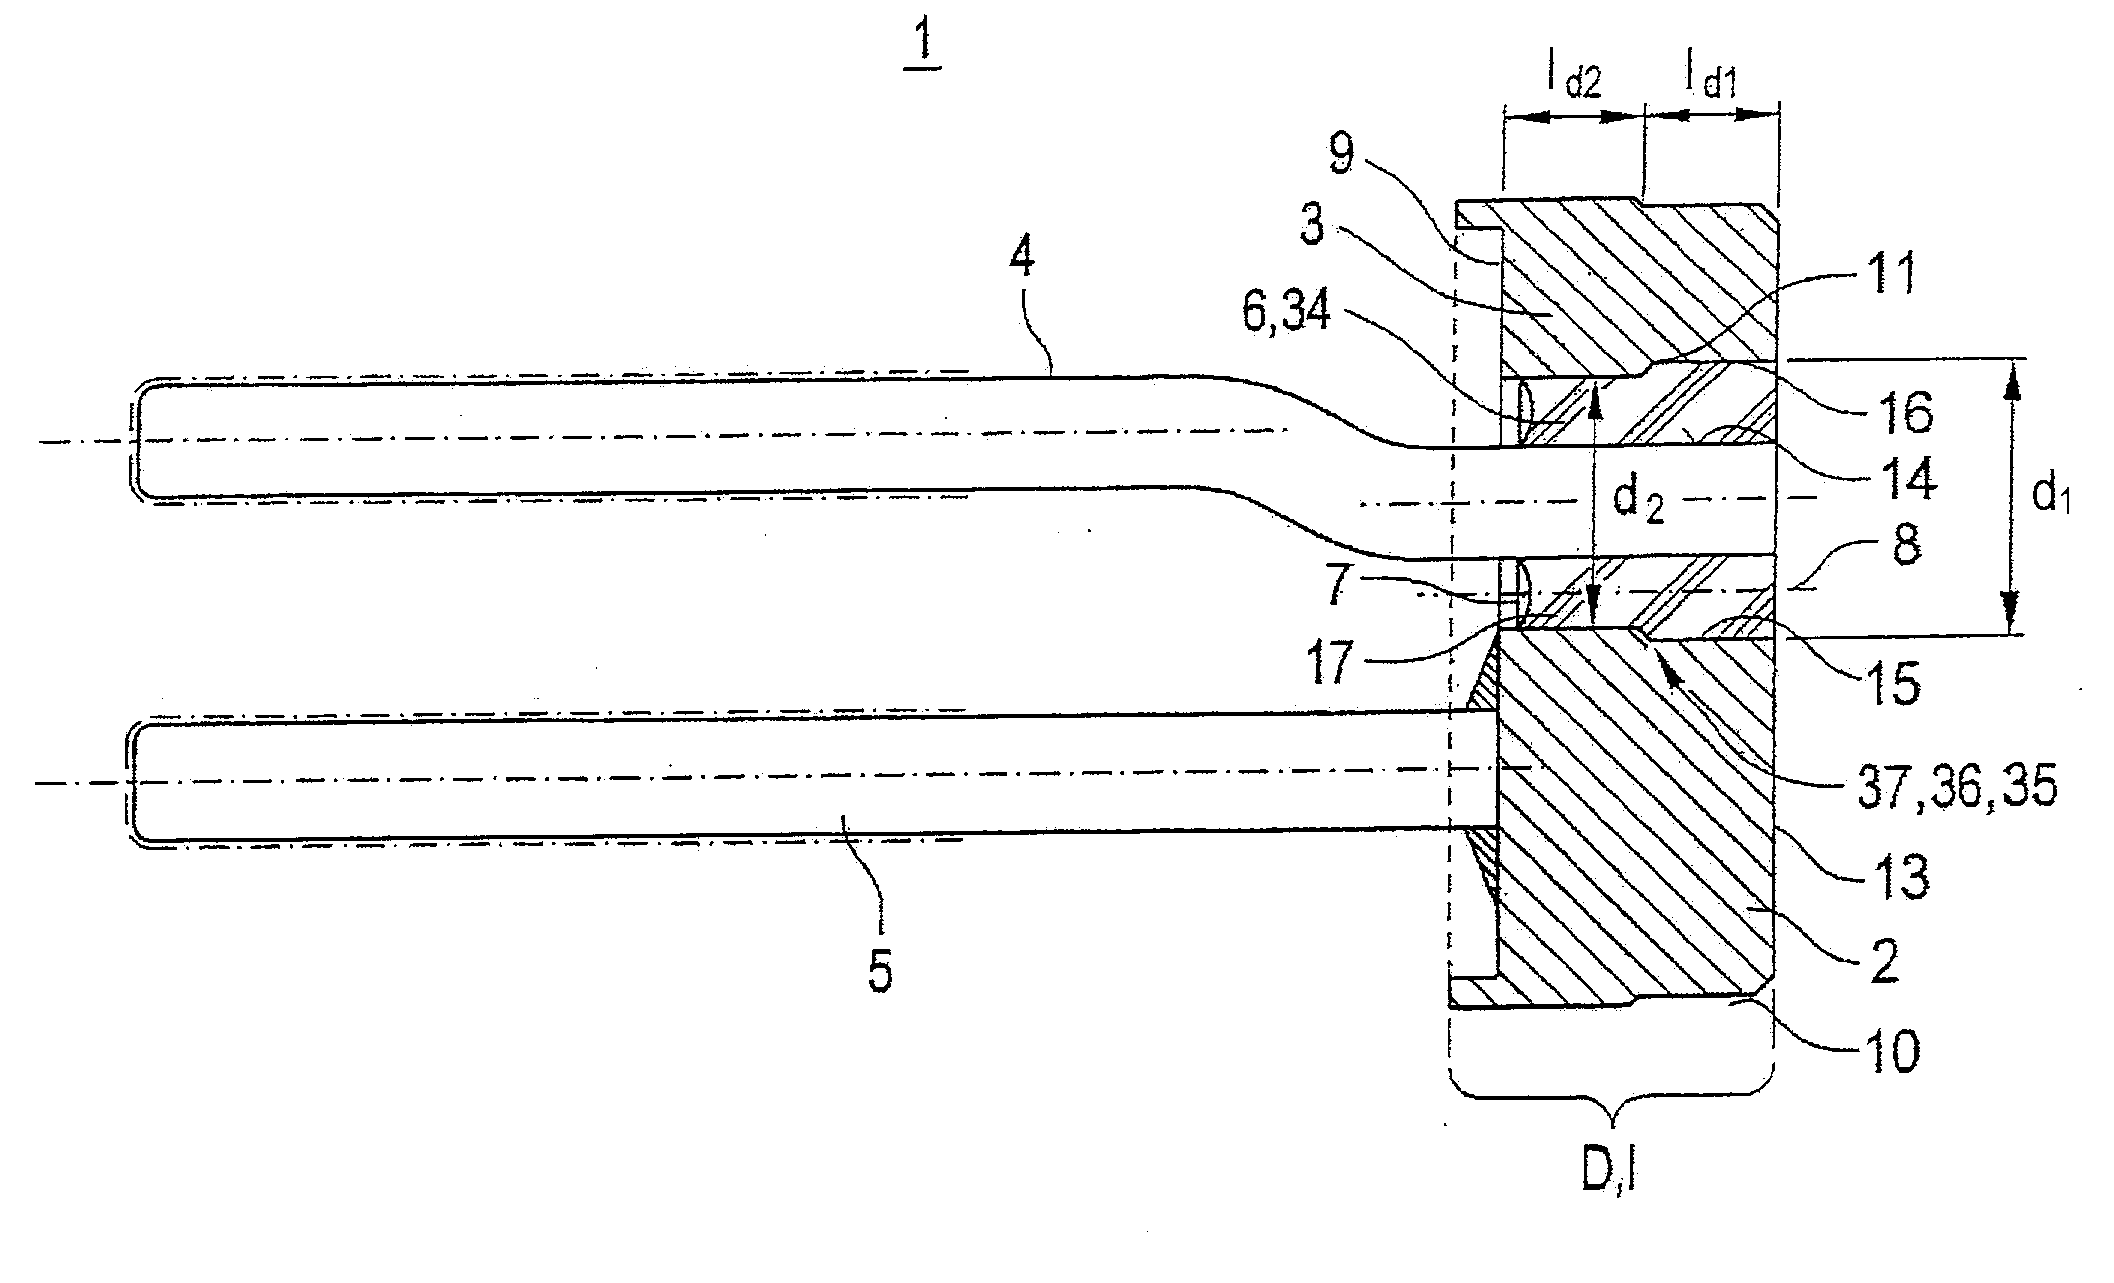 Metal-sealing material-feedthrough and utilization of the metal-sealing material feedthrough with an airbag, a belt tensioning device, and an ignition device